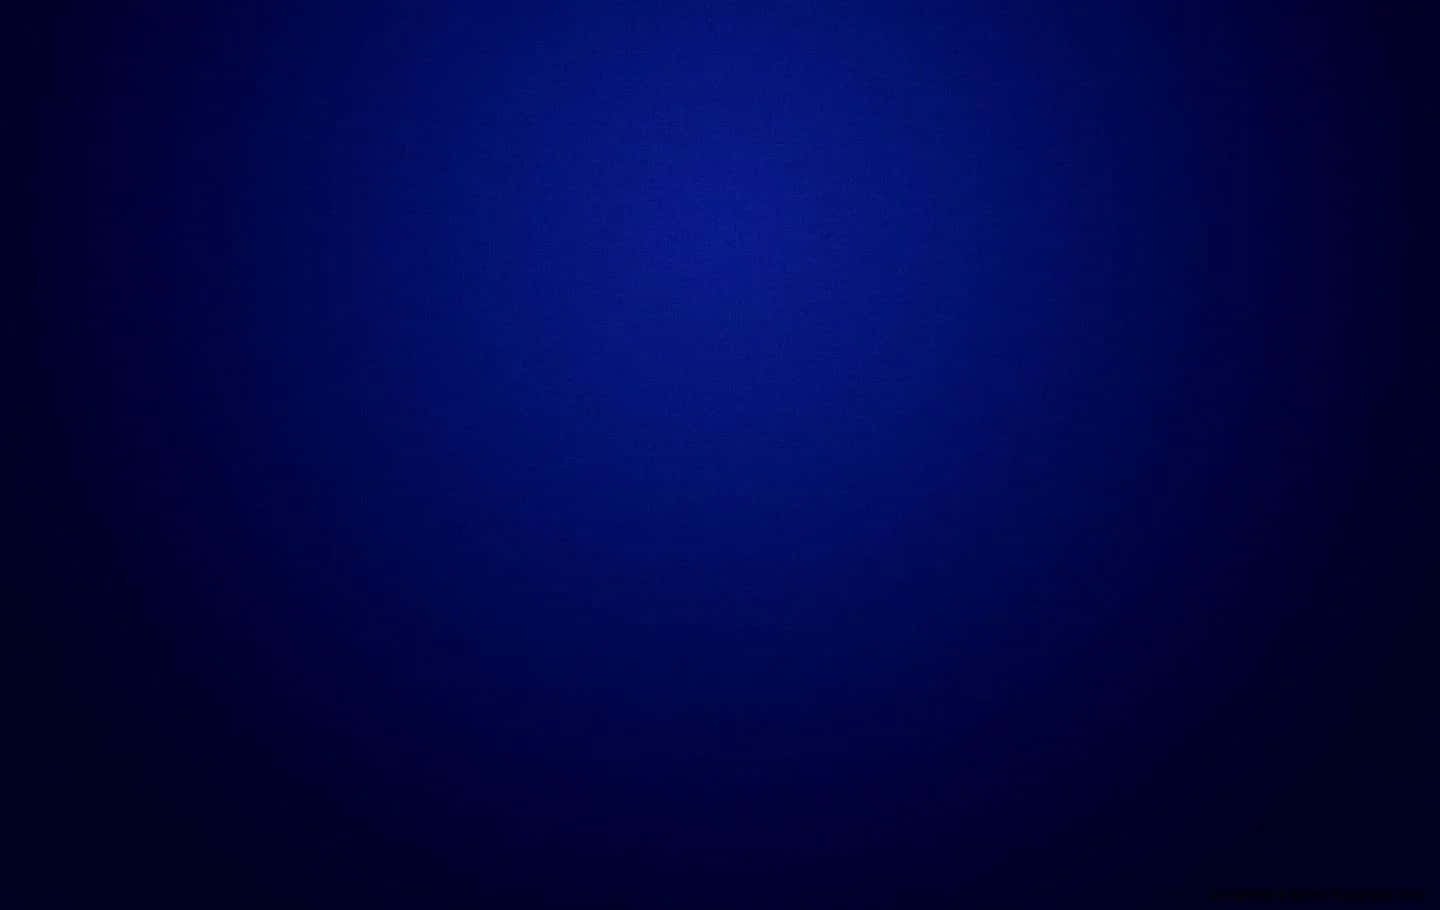 [200+] Navy Blue Backgrounds | Wallpapers.com